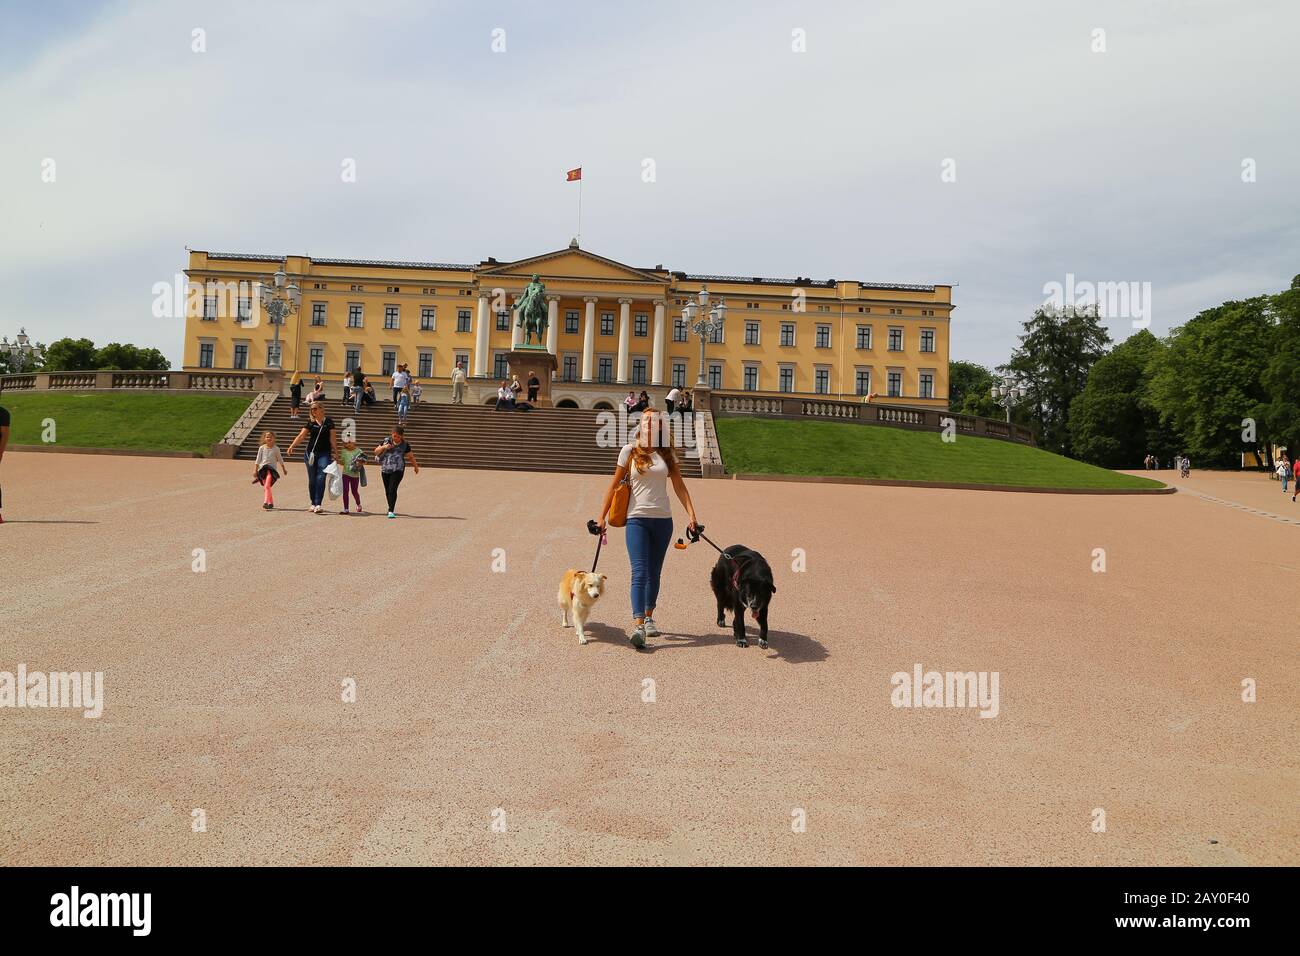 The Royal Palace in Oslo, the capital of Norway. People tourists walking on the palace grounds on a summer day Stock Photo